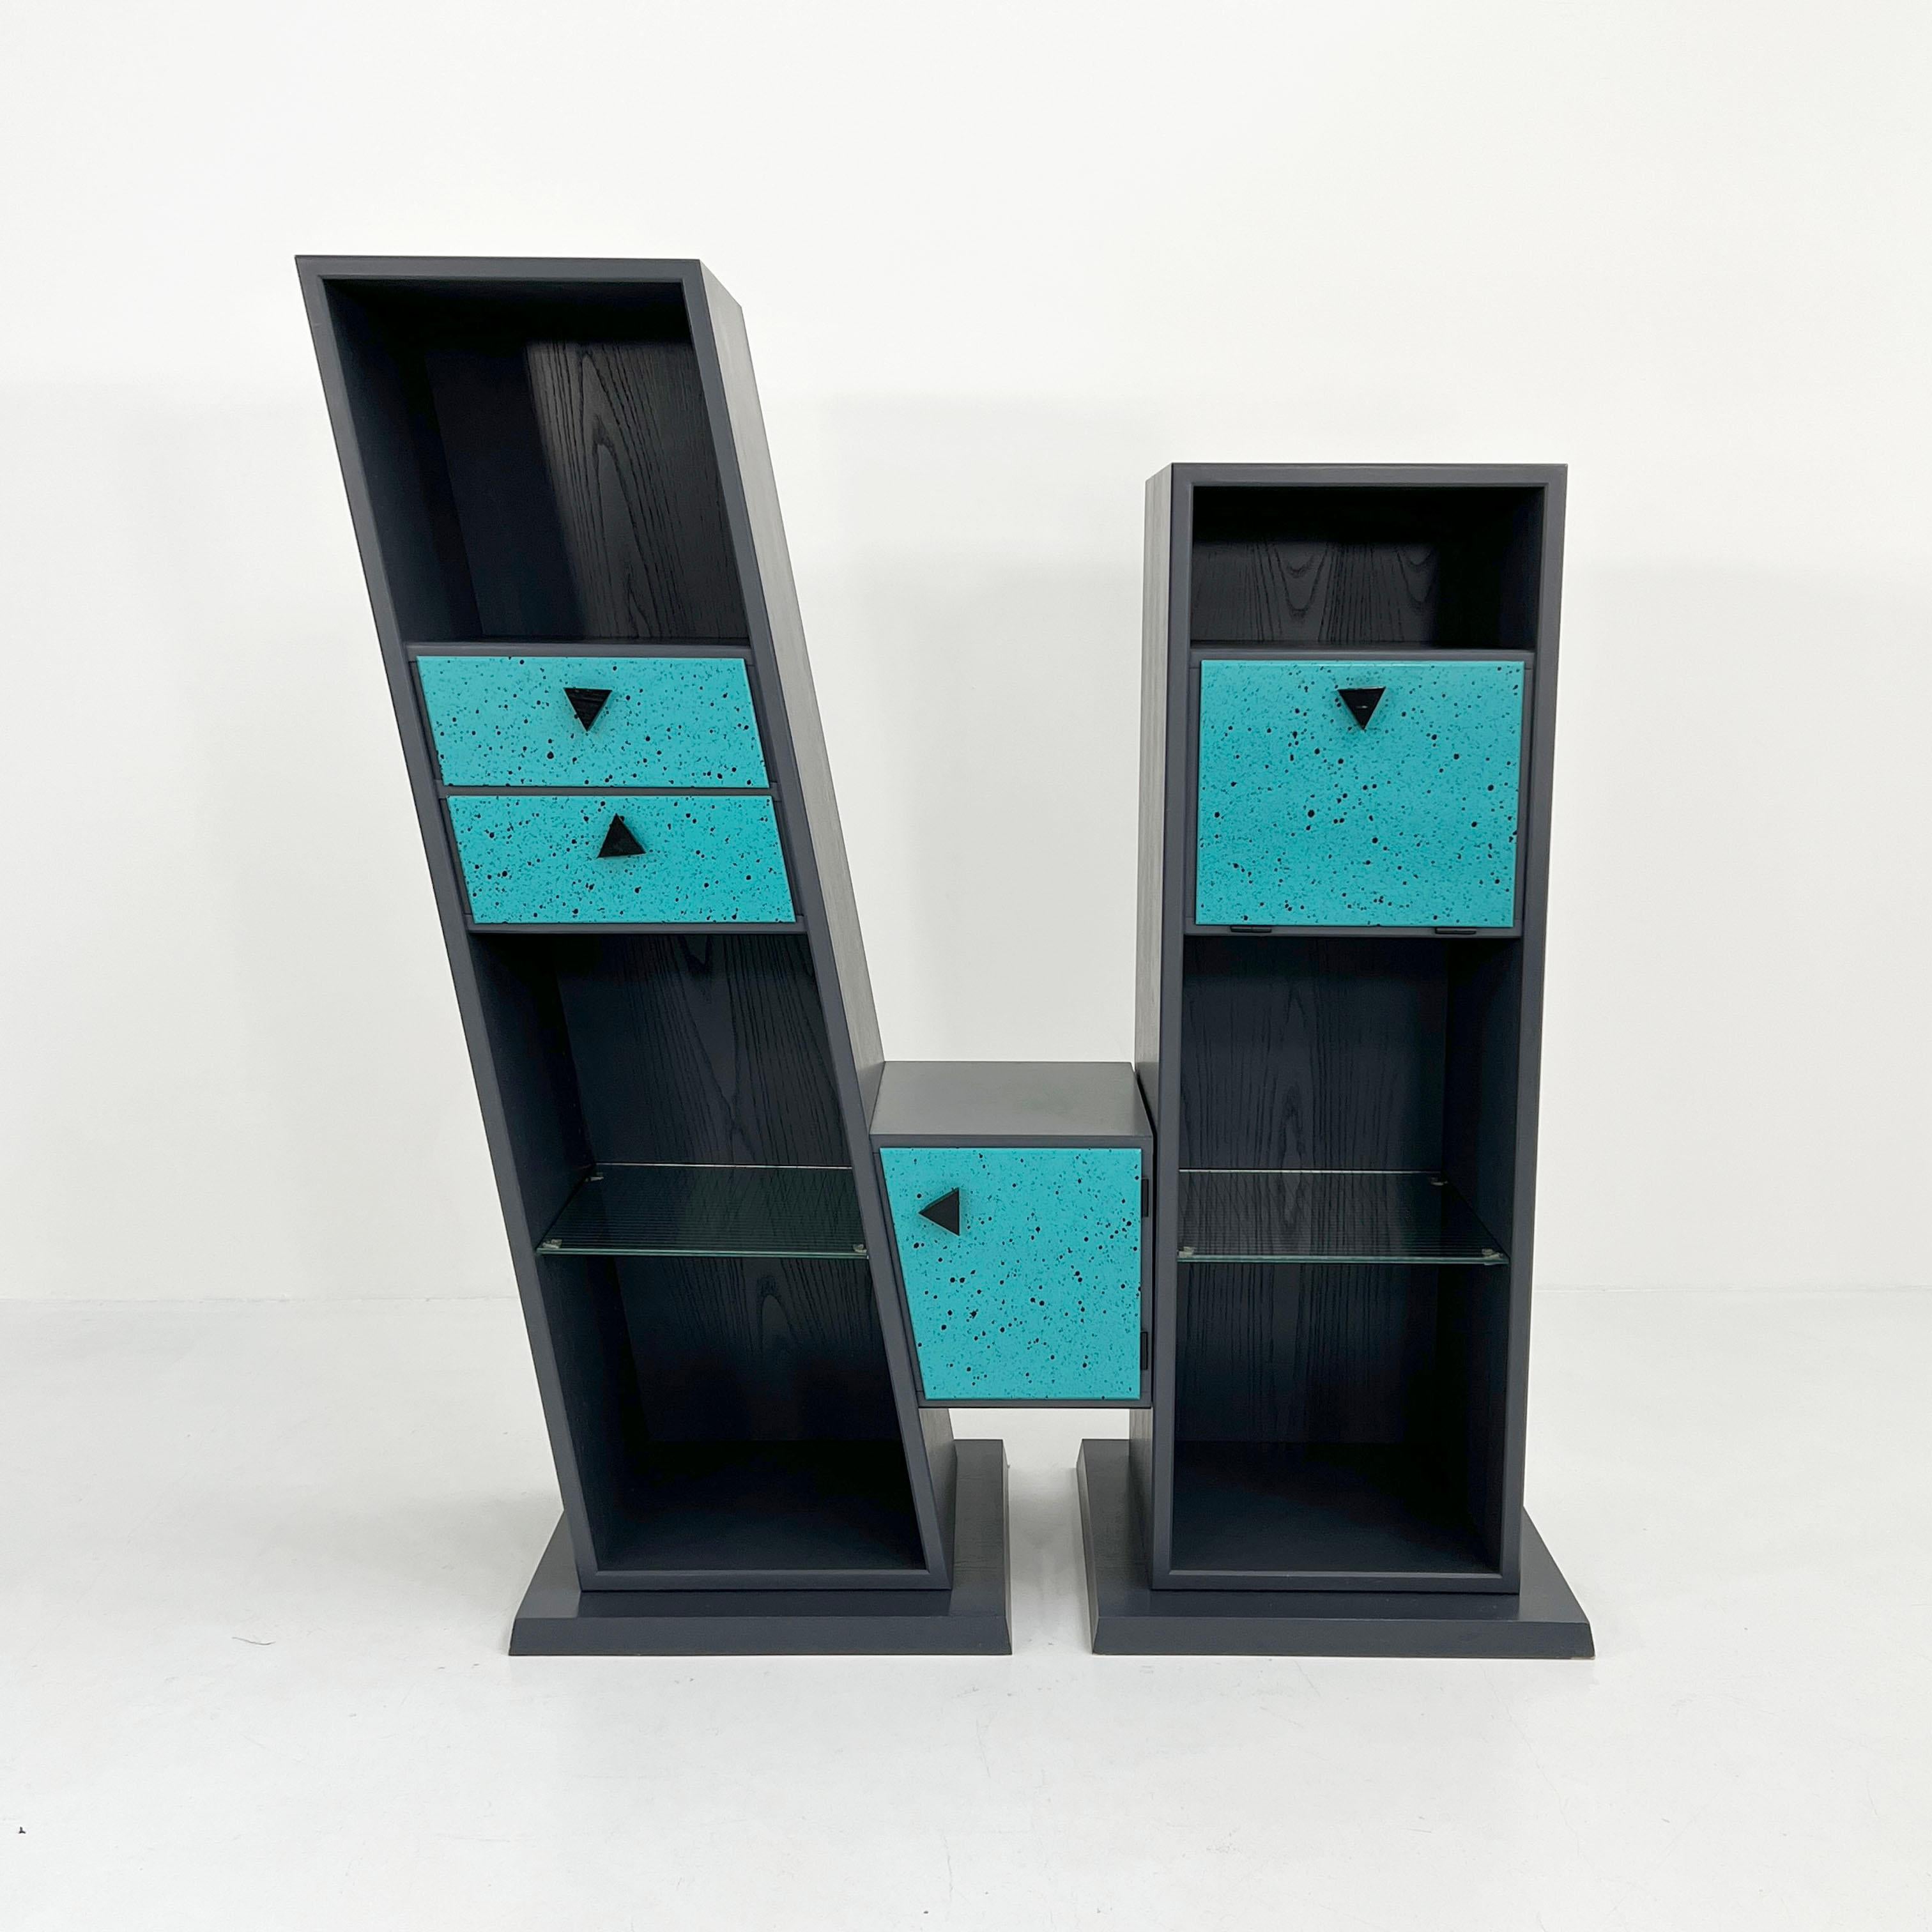 Design Period - Eighties
Measurements - Width 133 cm x Depth 52 cm x Height 144 cm 
Materials - Laminated, Metal 
Color - Grey, blue, purple
Light wear consistent with age and use. 3 chips on the edges at the back - see pictures of the details.